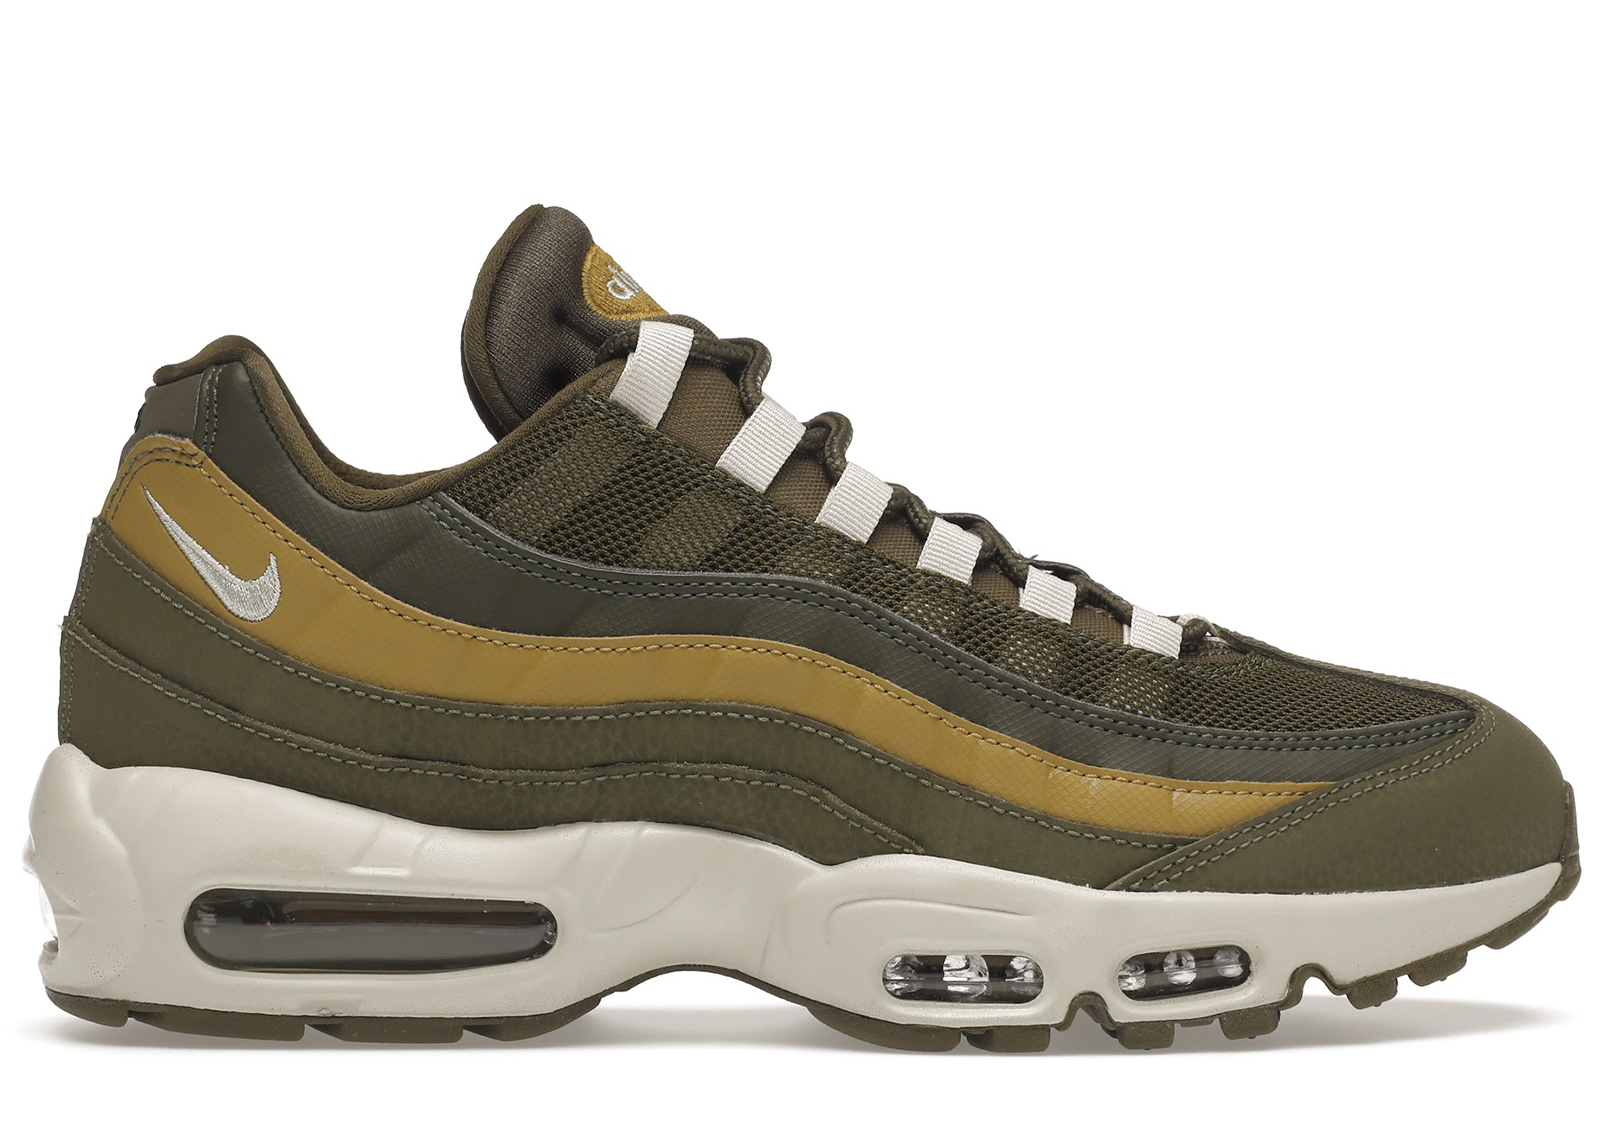 Nike Air Max 95 Olive Canvas Men's - 749766-303 - US